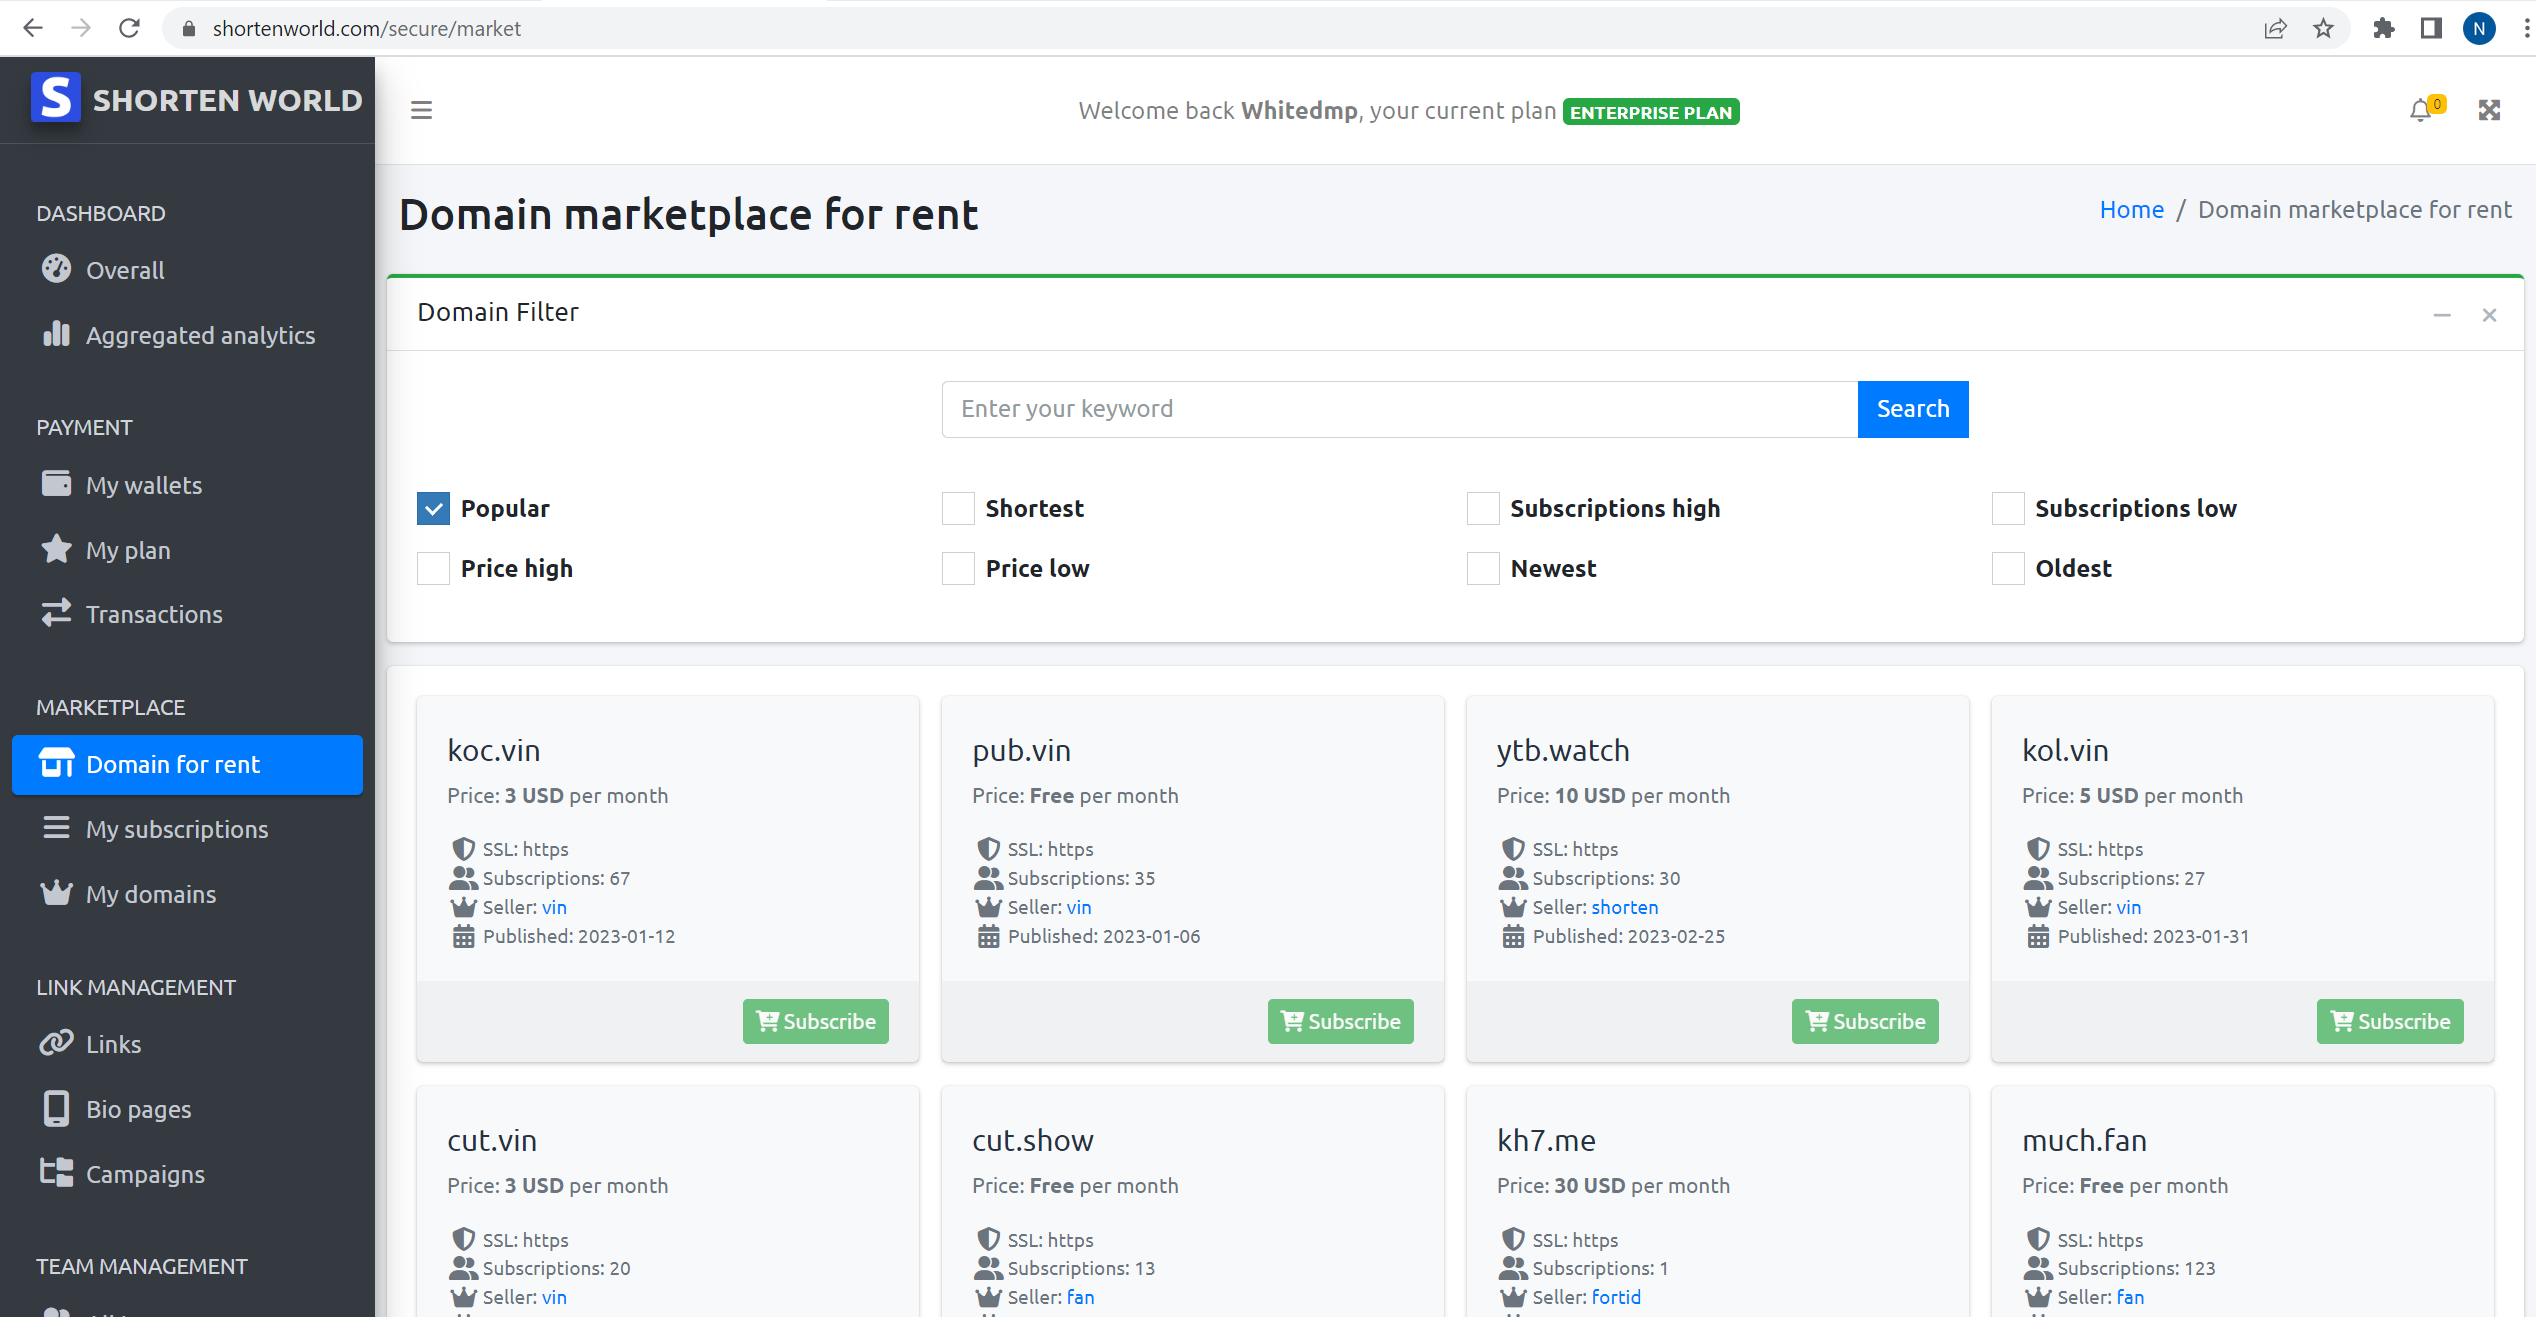 Domain marketplace for rent